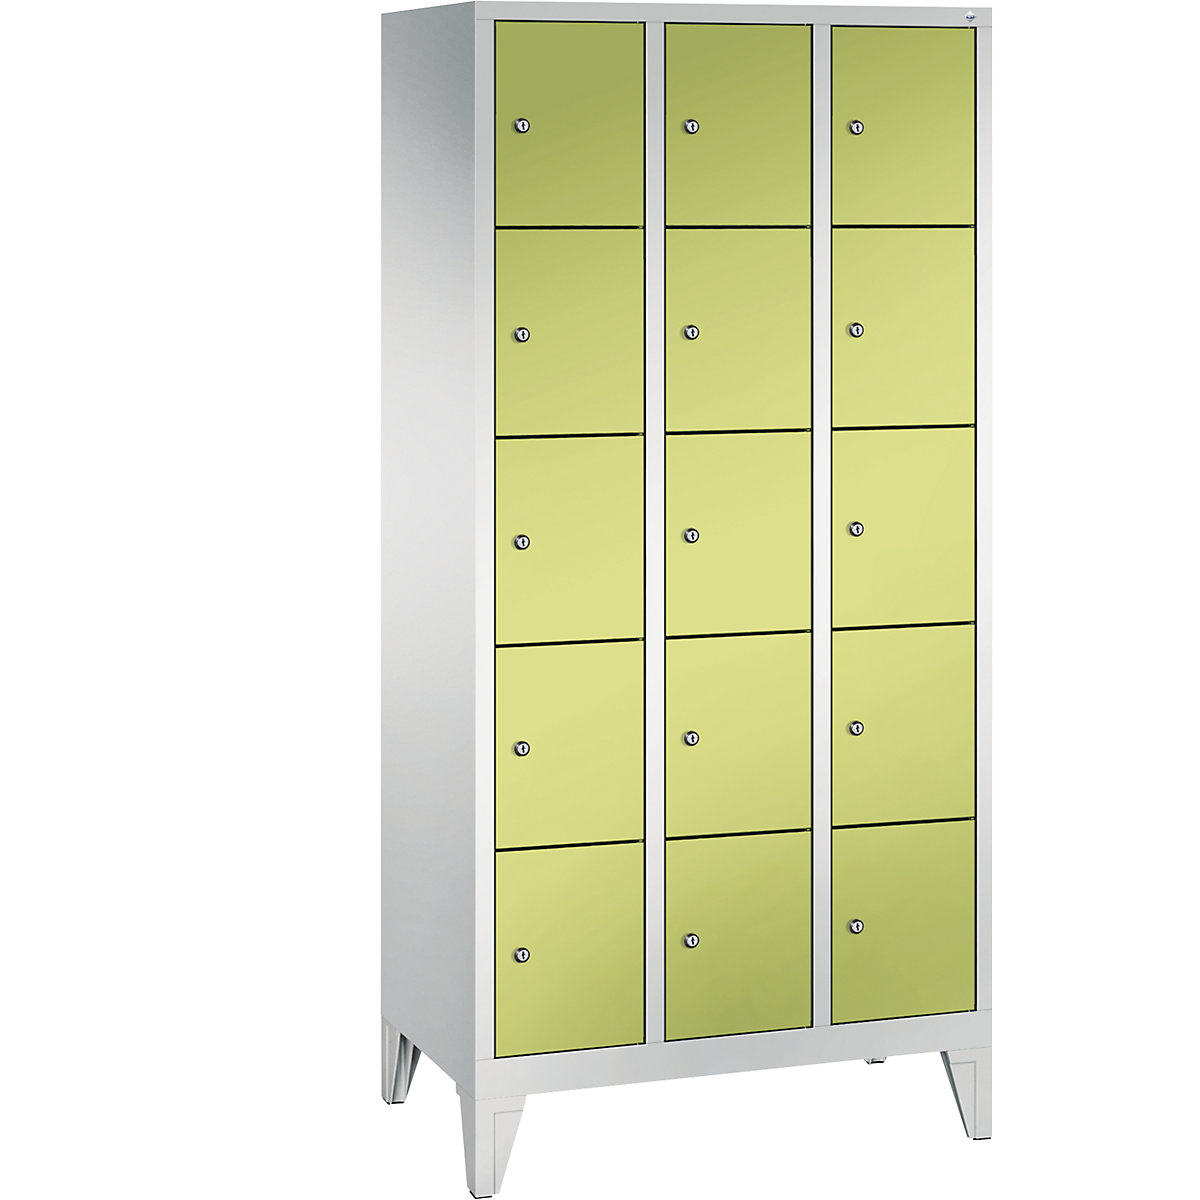 CLASSIC locker unit with feet – C+P, 3 compartments, 5 shelf compartments each, compartment width 300 mm, light grey / viridian green-4